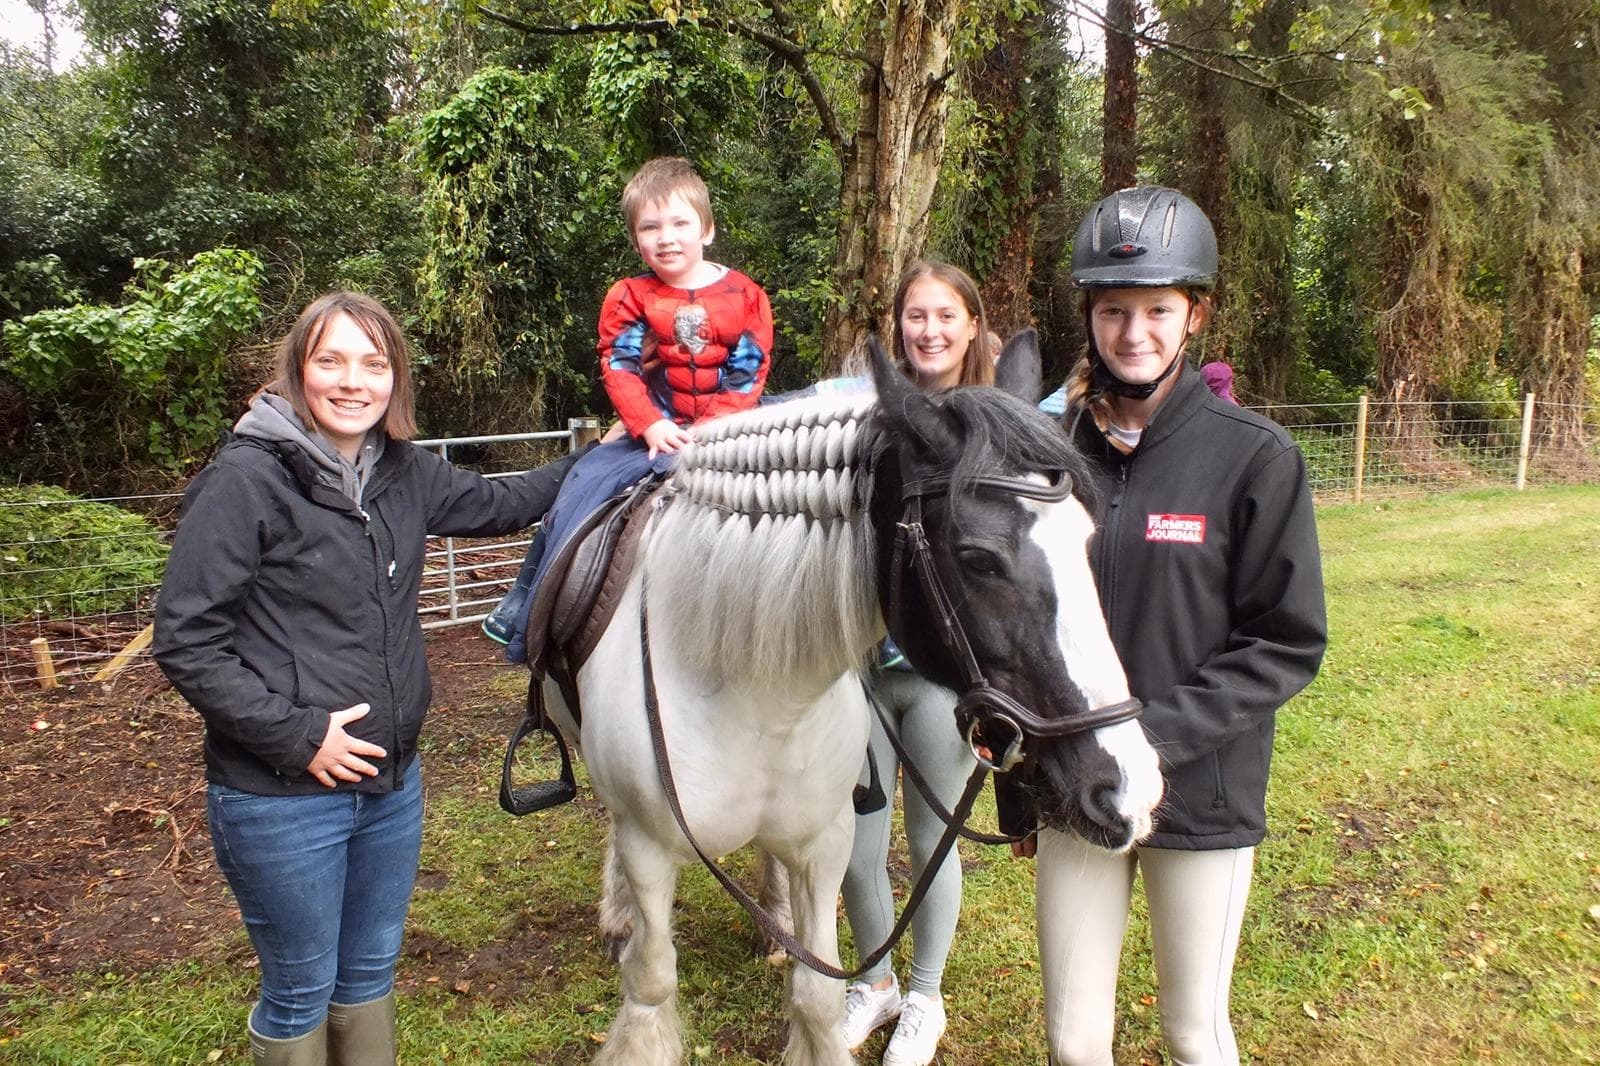 Children enjoying horse riding during the fundraising event at the Rectory of Garrison Parish Church.